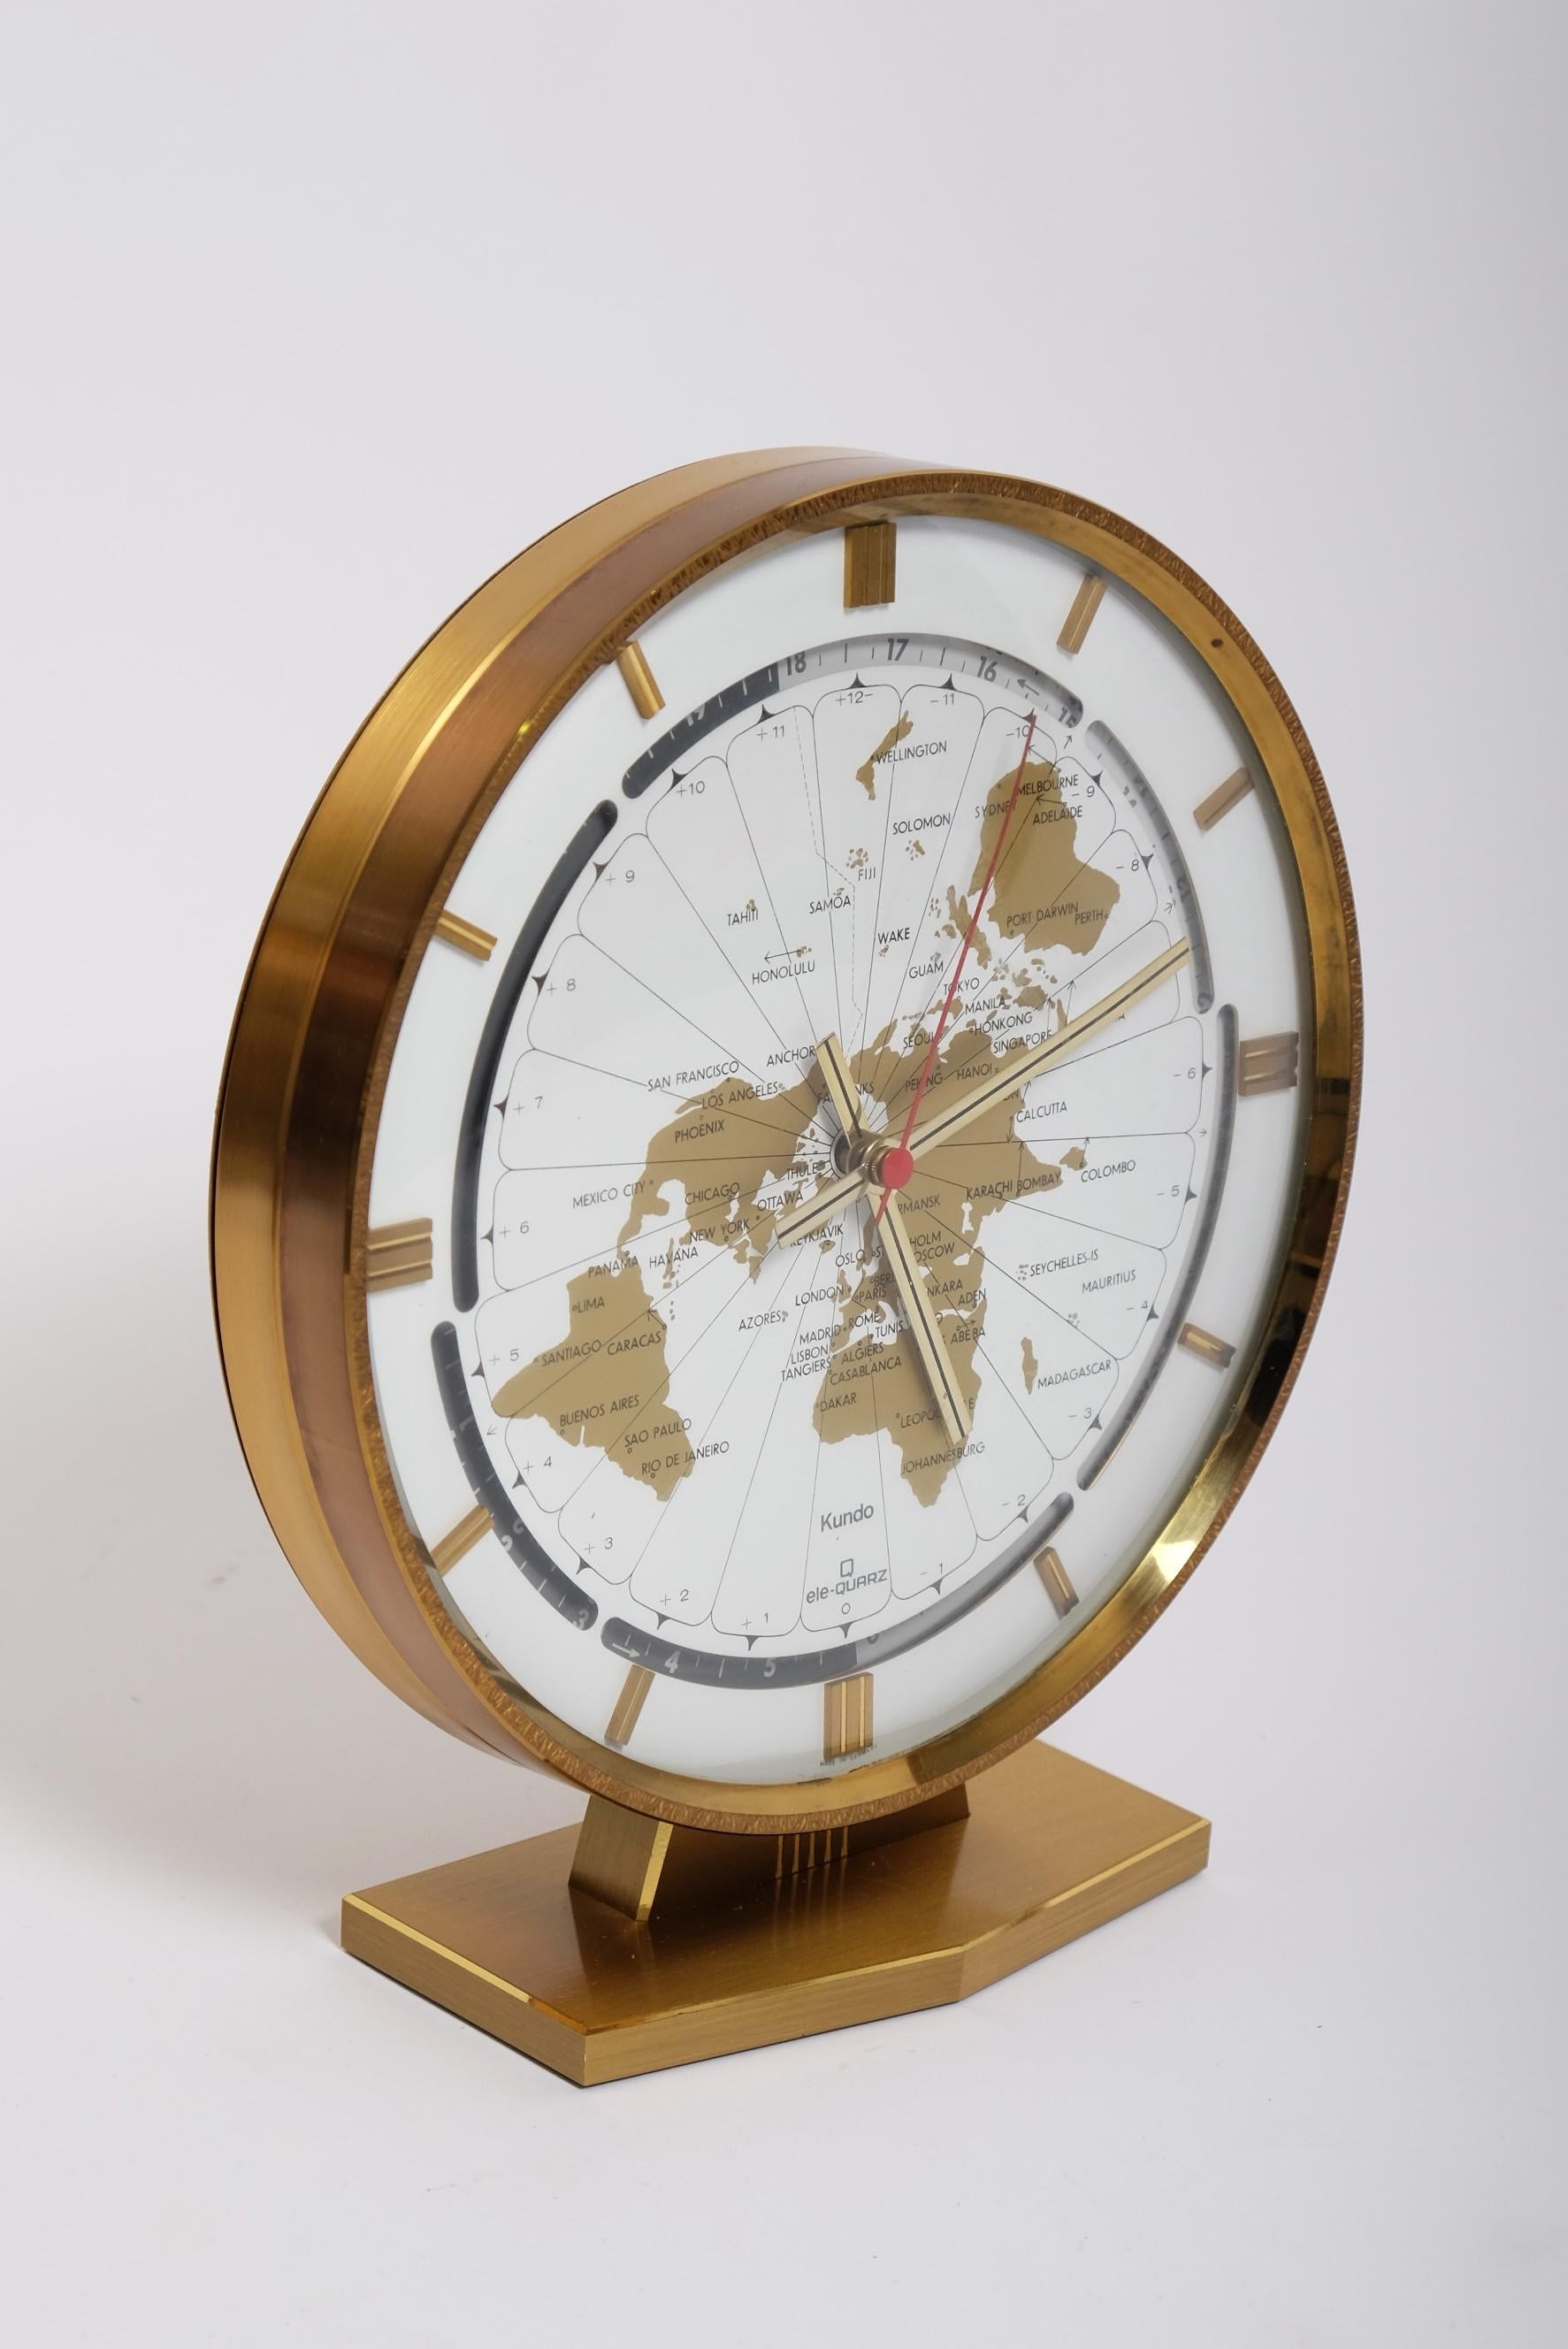 German Large Brass Table World Time Zone Clock by Kundo / Kieninger & Obergfell, 1970s For Sale